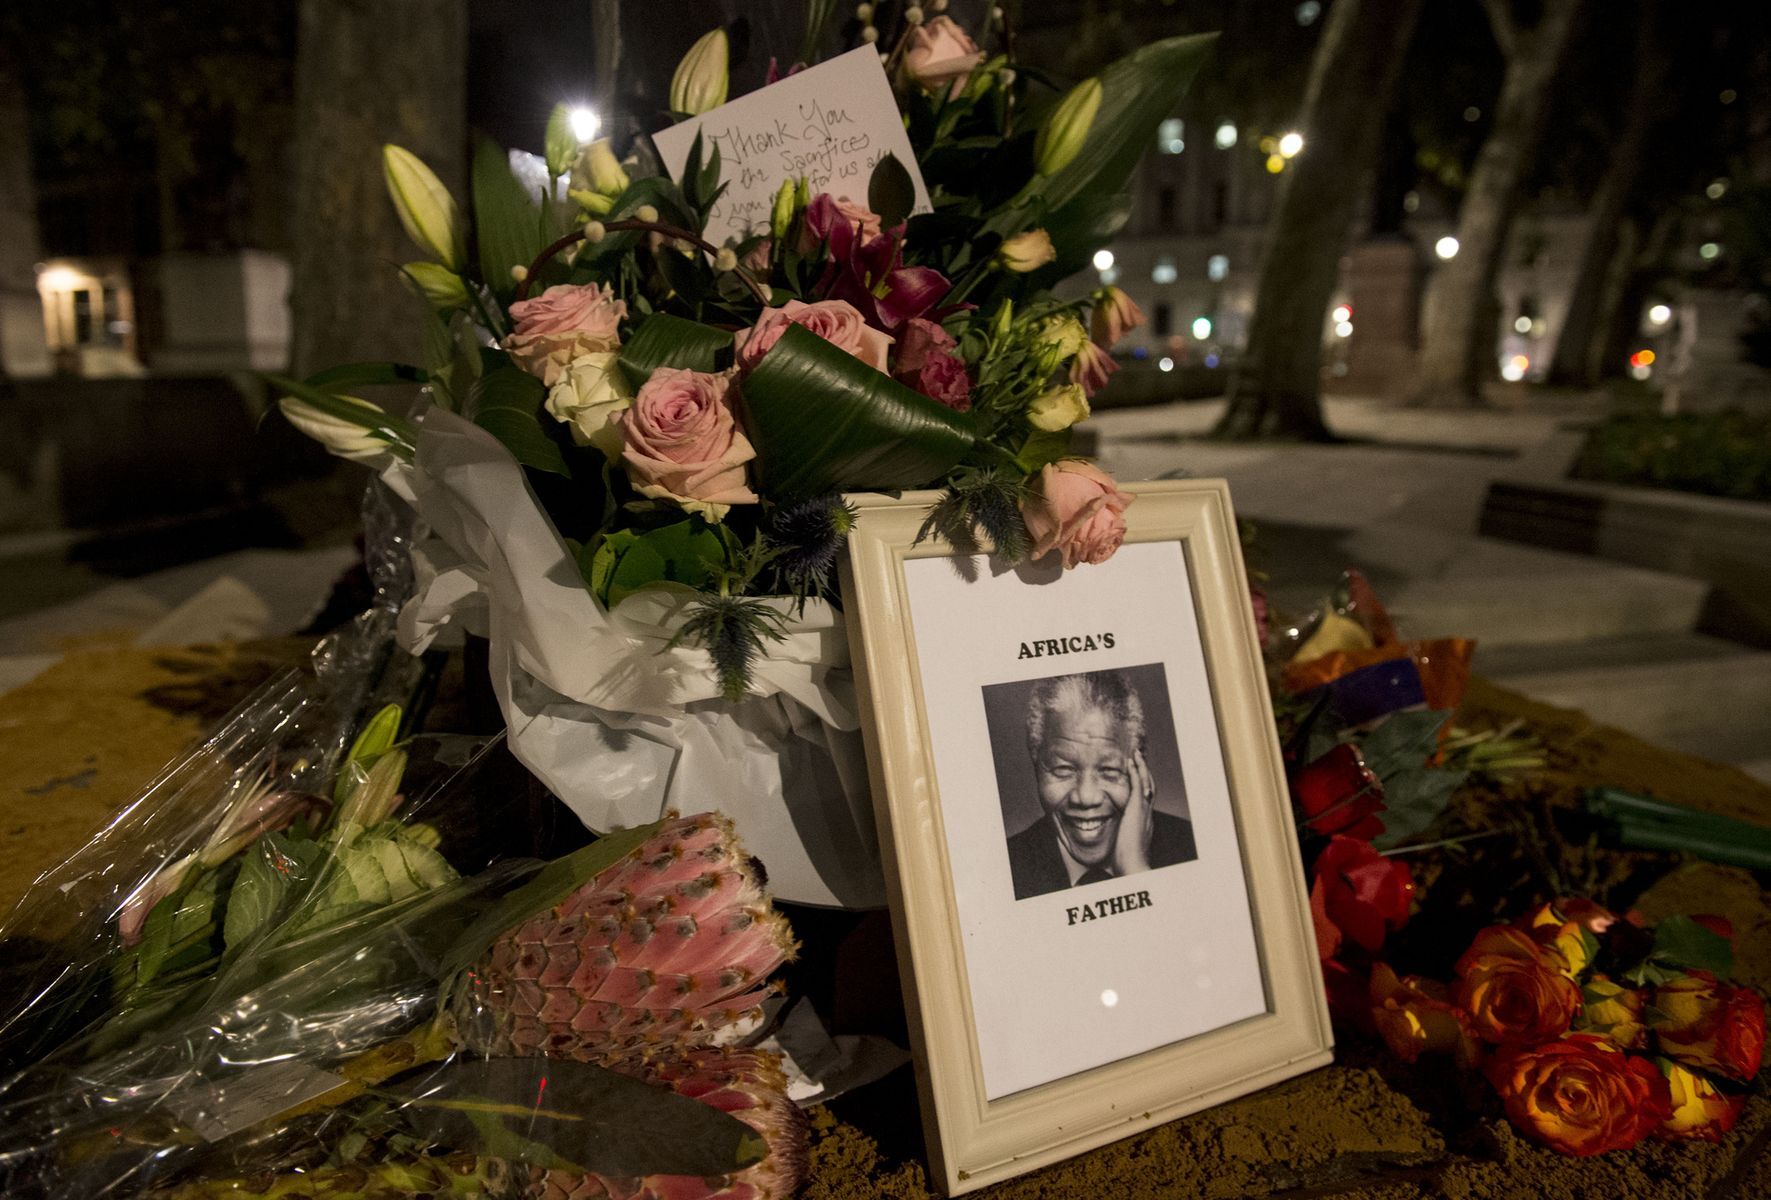 <p>Nelson Mandela died on December 5, 2013, in Johannesburg <a href="https://www.history.com/this-day-in-history/nelson-mandela-death-2013" rel="noreferrer noopener">following a lung infection</a>. As South Africans gathered throughout the country to honour the anti-apartheid hero, a <a href="https://www.bbc.com/news/in-pictures-25388162" rel="noreferrer noopener">state funeral was held in Qunu, near his childhood village</a>, attended by dignitaries from around the world. An <a href="https://www.ctvnews.ca/world/xhosa-rituals-to-be-featured-in-mandela-s-funeral-1.1592259" rel="noreferrer noopener">intimate traditional Xhosa ceremony then took place</a> in Mandela’s family cemetery.</p>